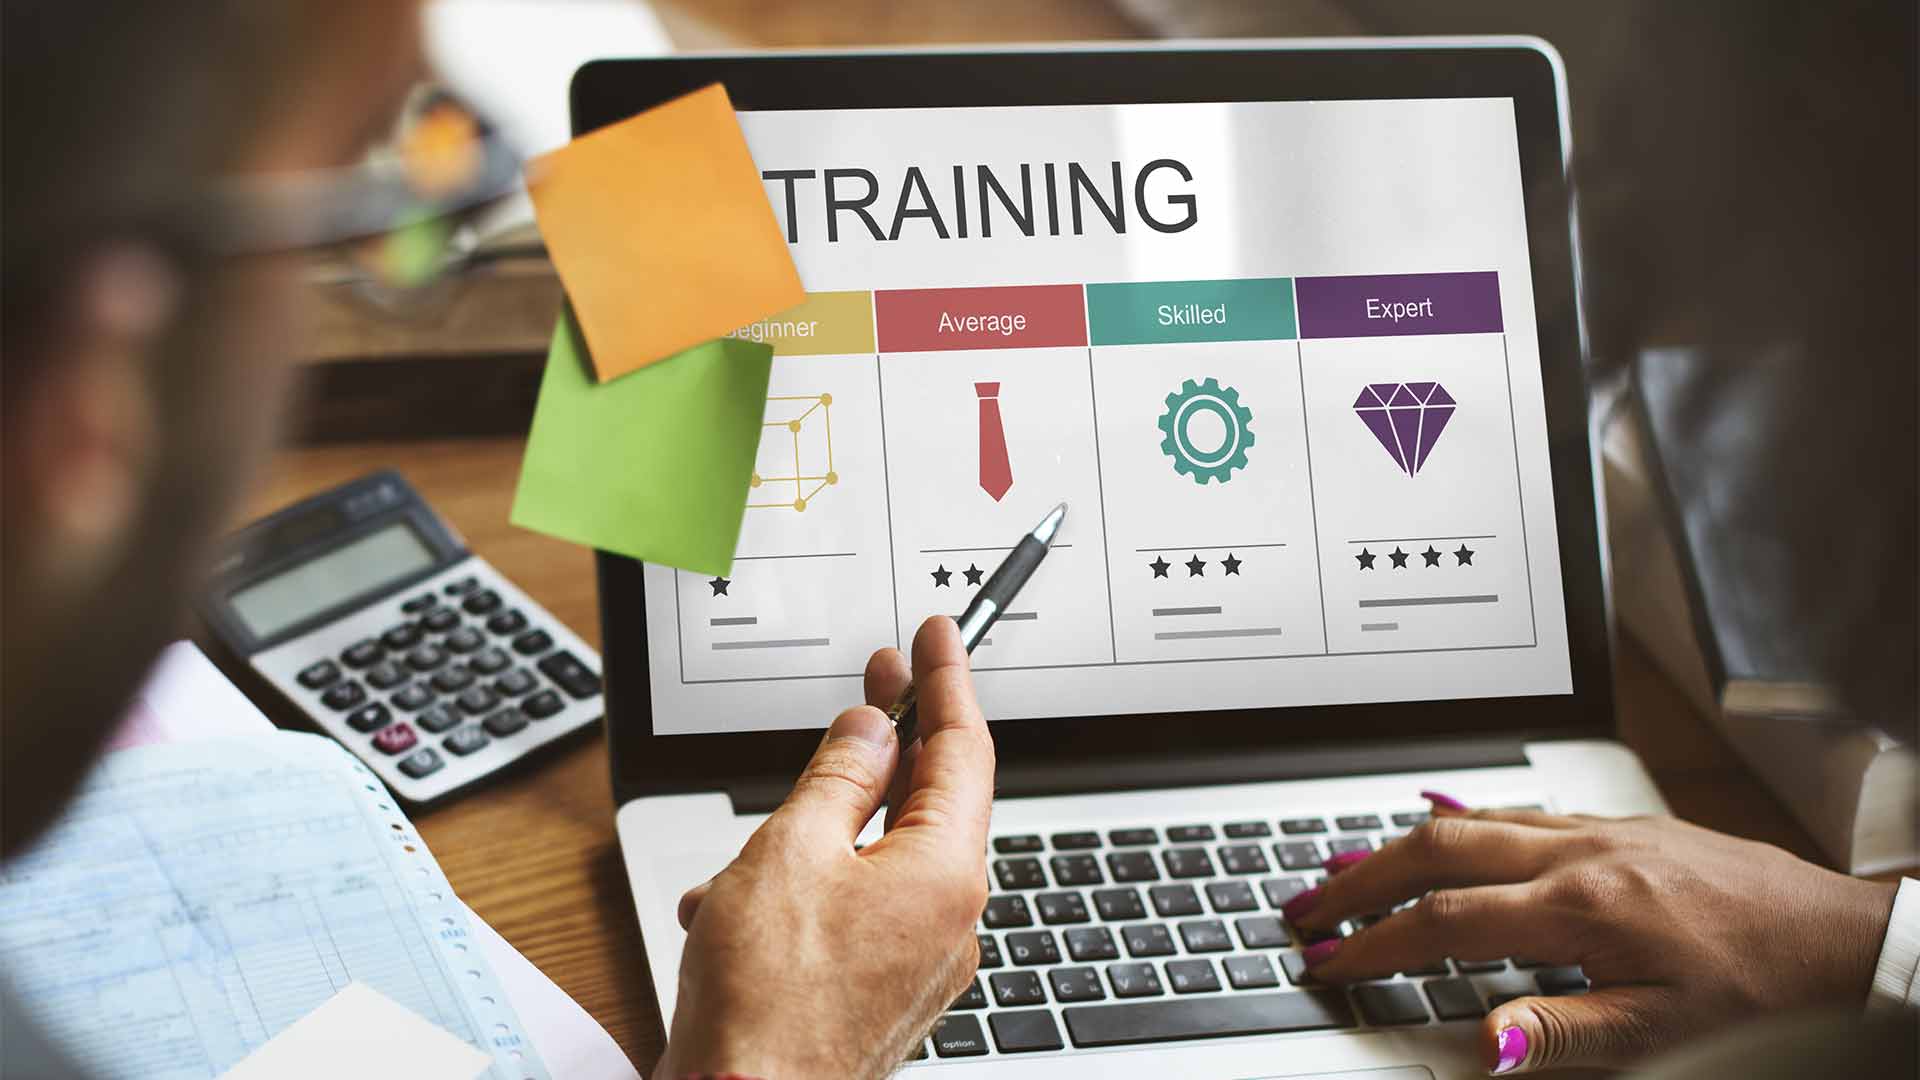 Digital Learning Journeys in Corporate Training